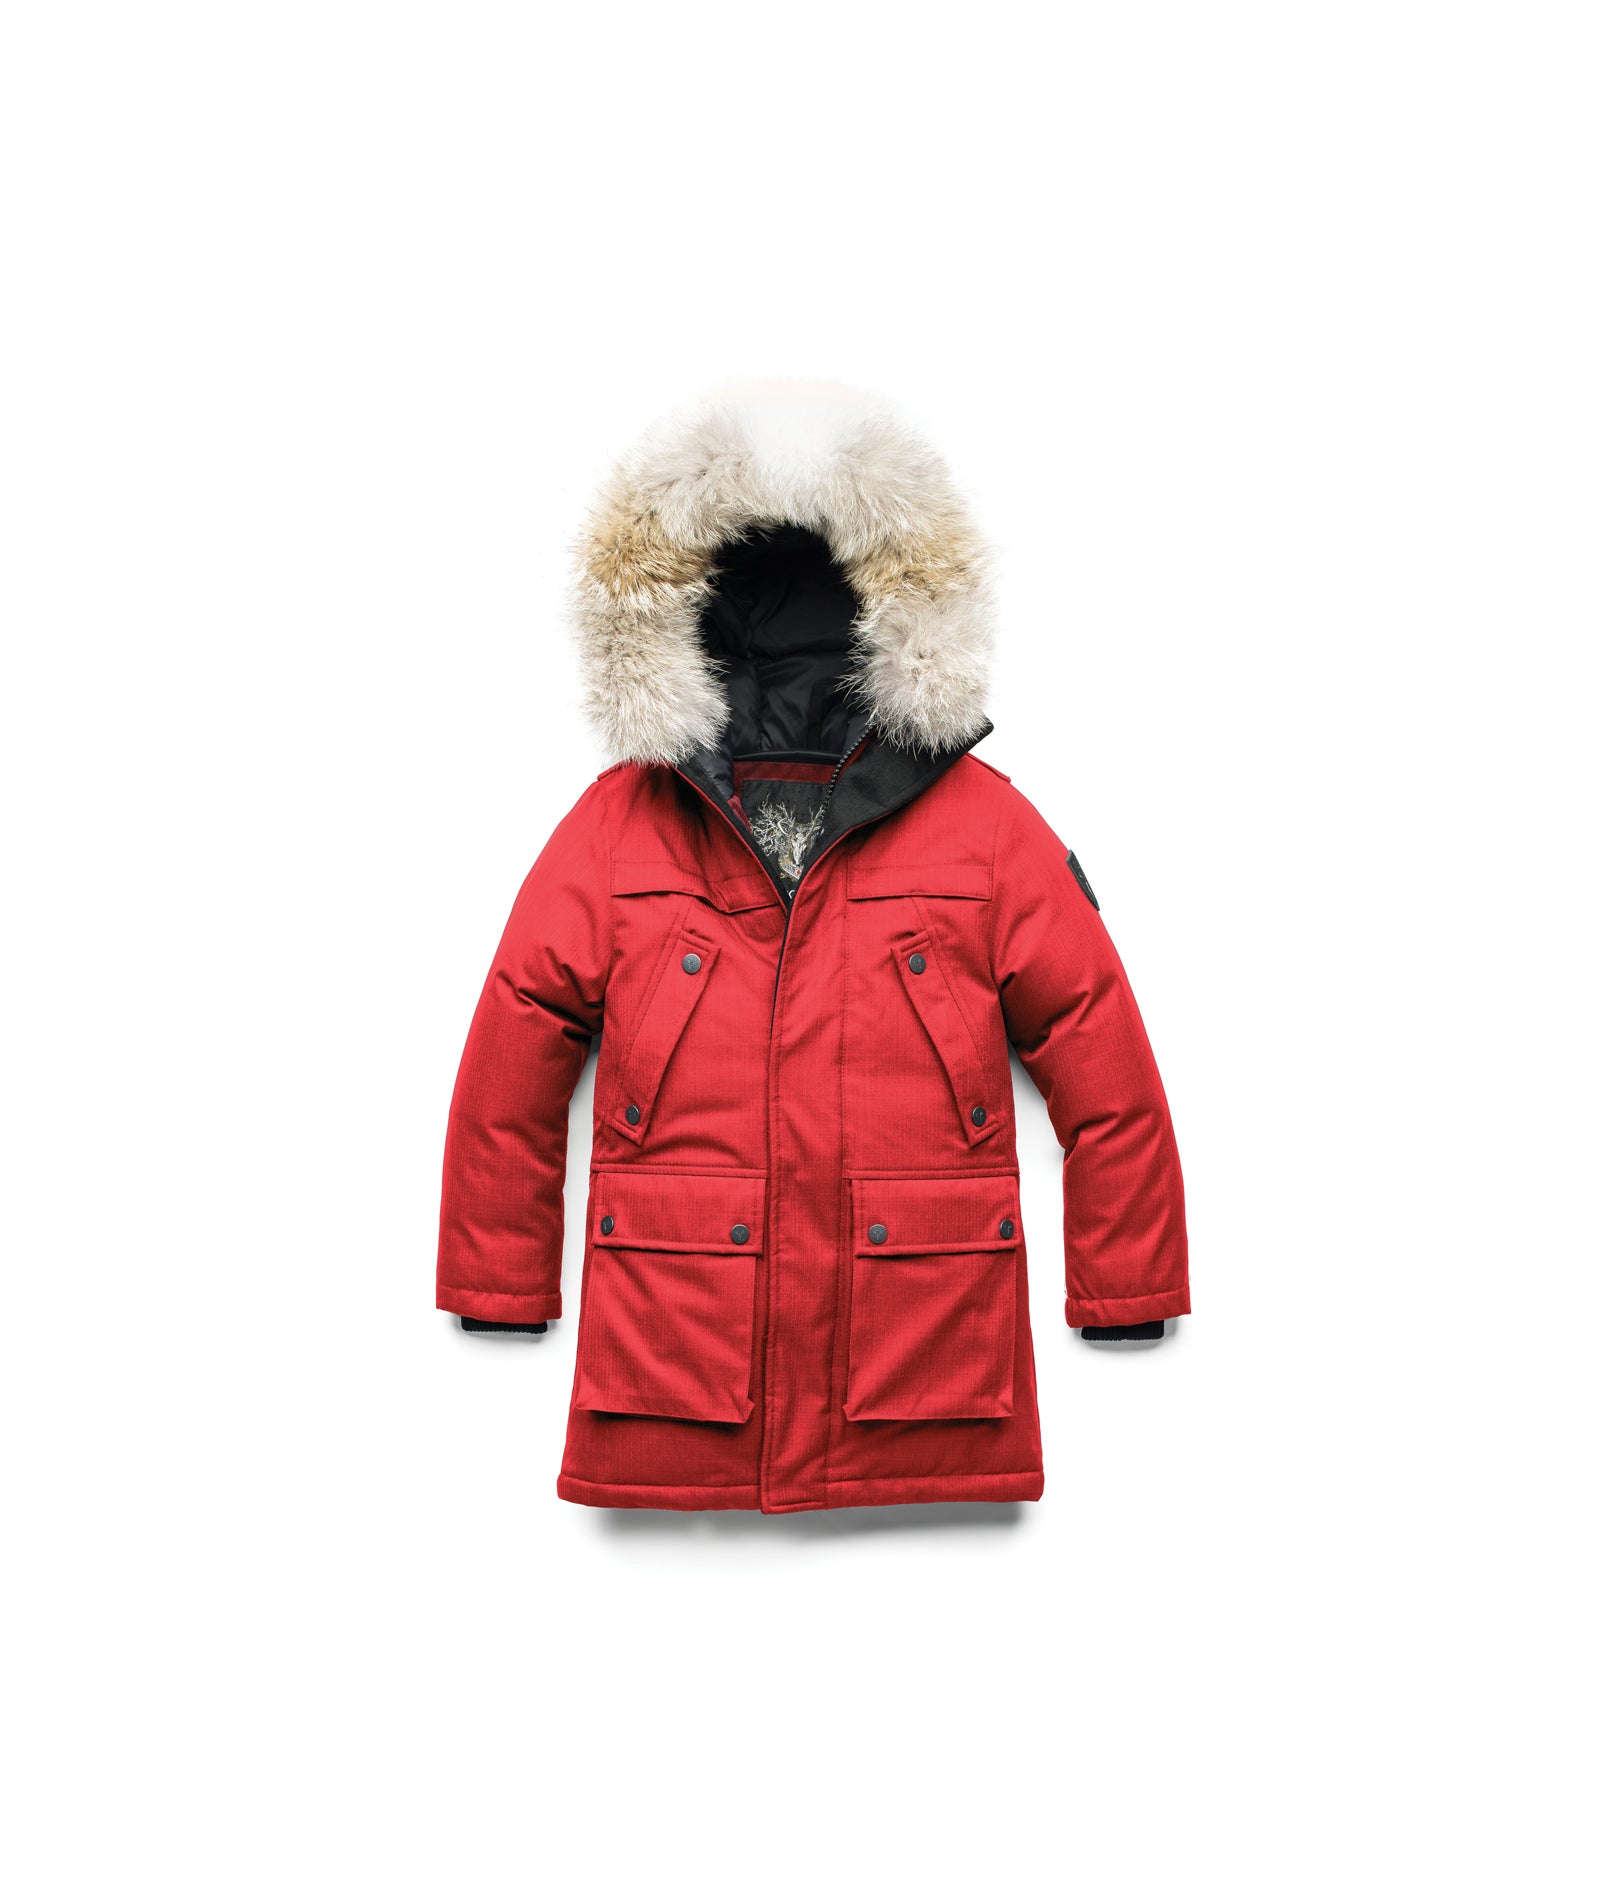 The best kid's down filled parka that's machine washable, waterproof, windproof and breathable in CH Red